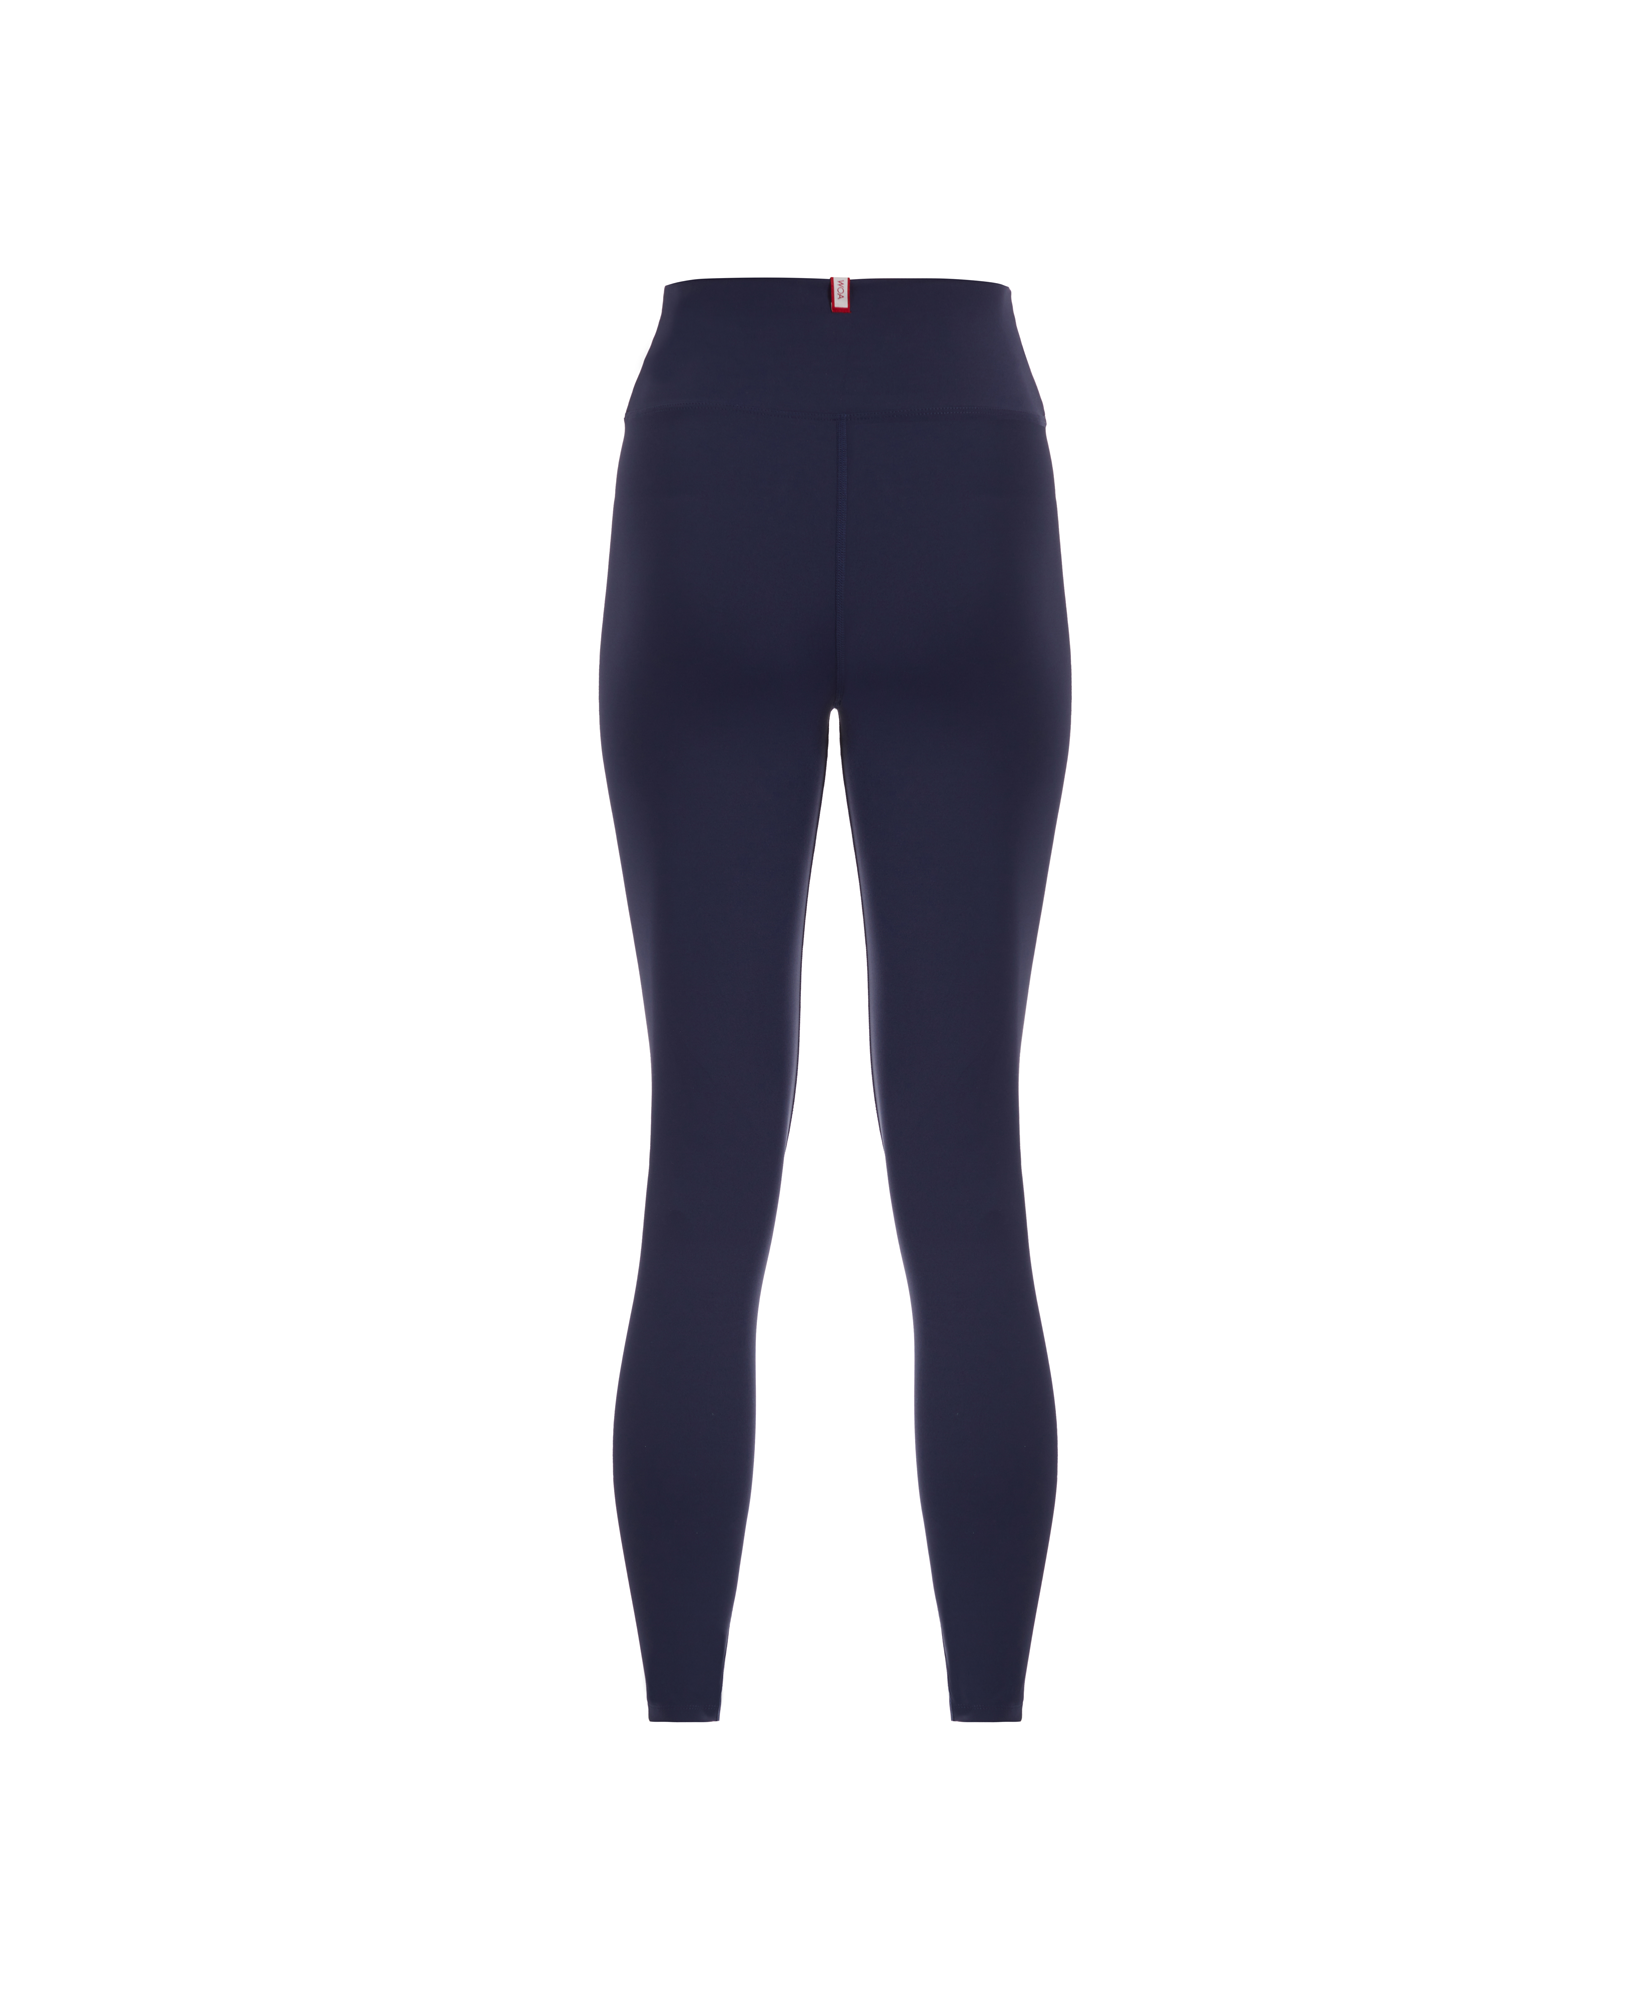 Routine Legging in Navy Nimbus Fabric with 4-Way Stretch – Wear One's At